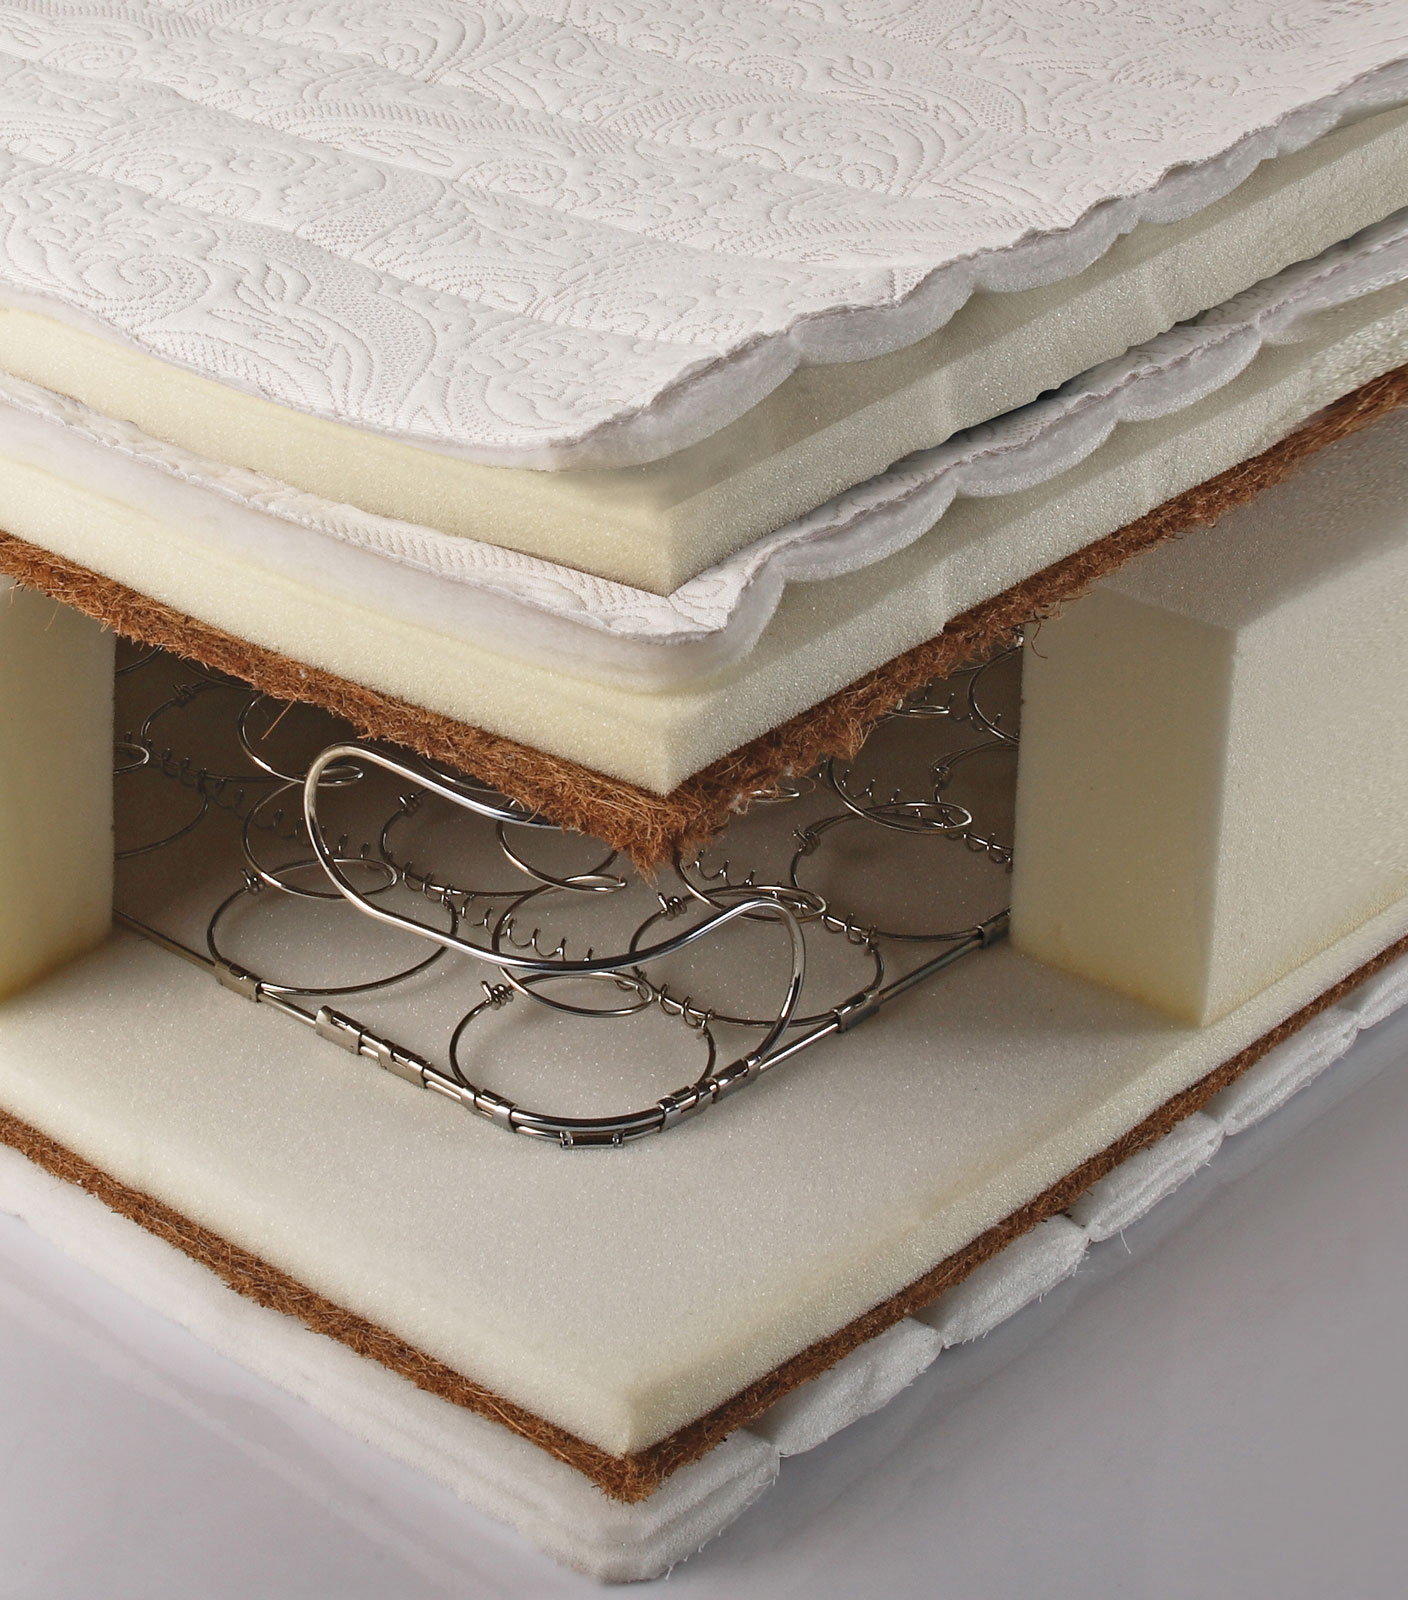 Hybrid Mattress That Suits You Bedroom Design - Beautiful Homes